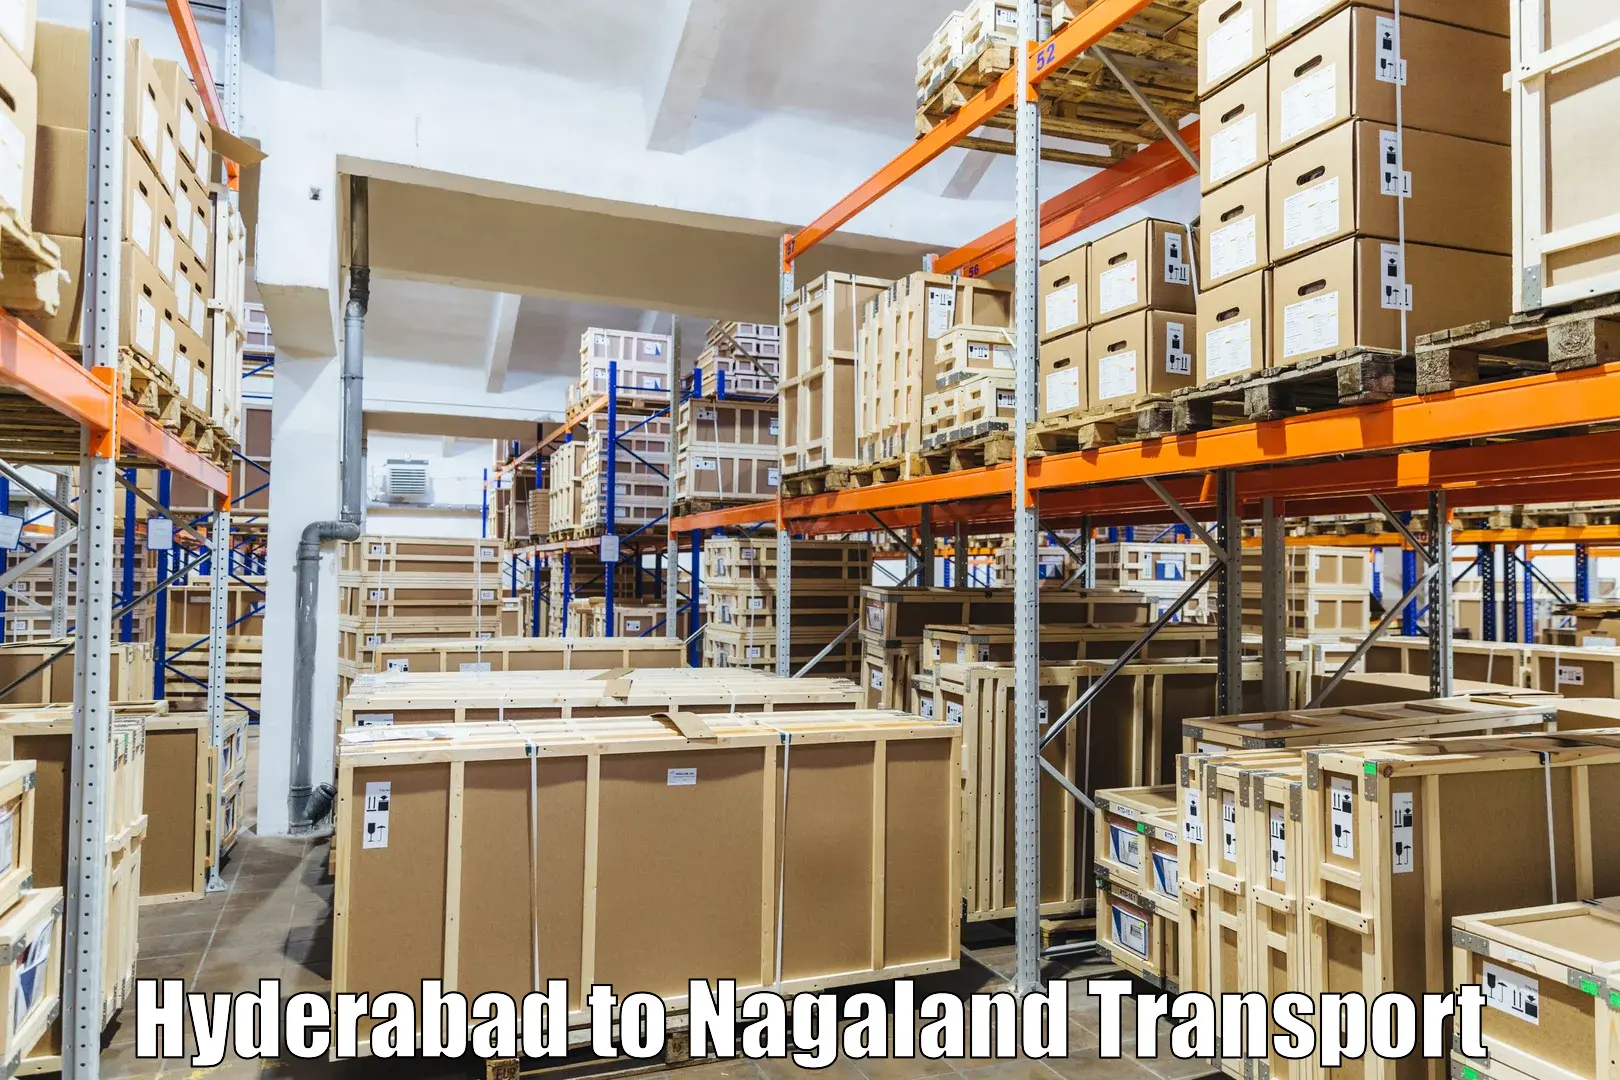 Lorry transport service in Hyderabad to Nagaland